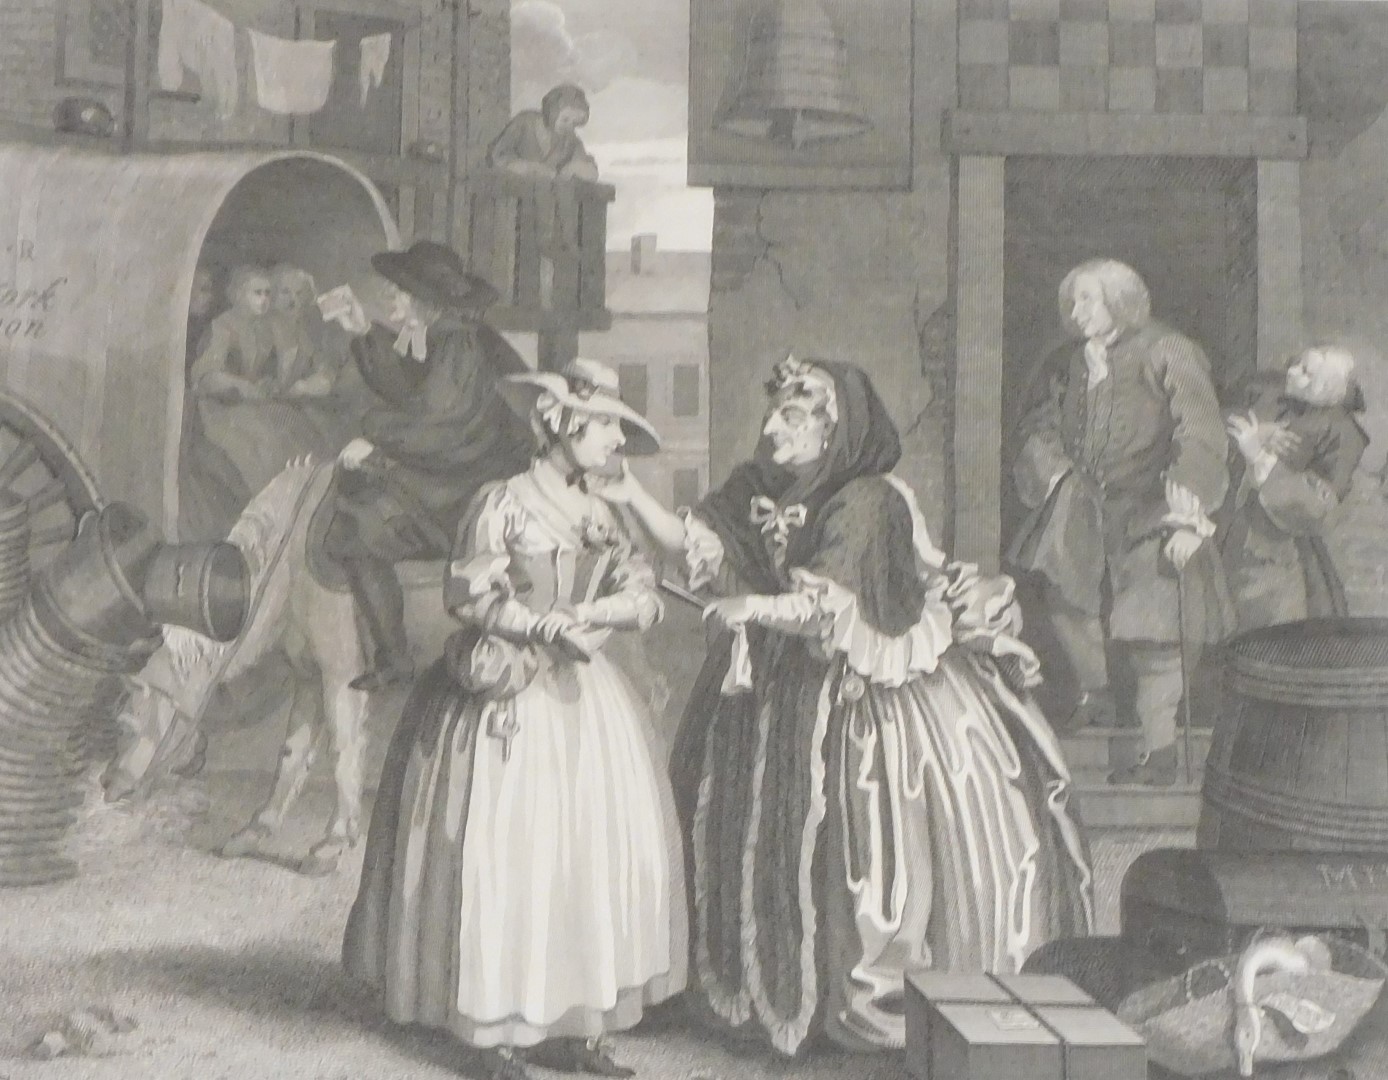 After William Hogarth (English, 1697-1764) A Harlots Progress, engravings, plates one to six, publis - Image 7 of 7